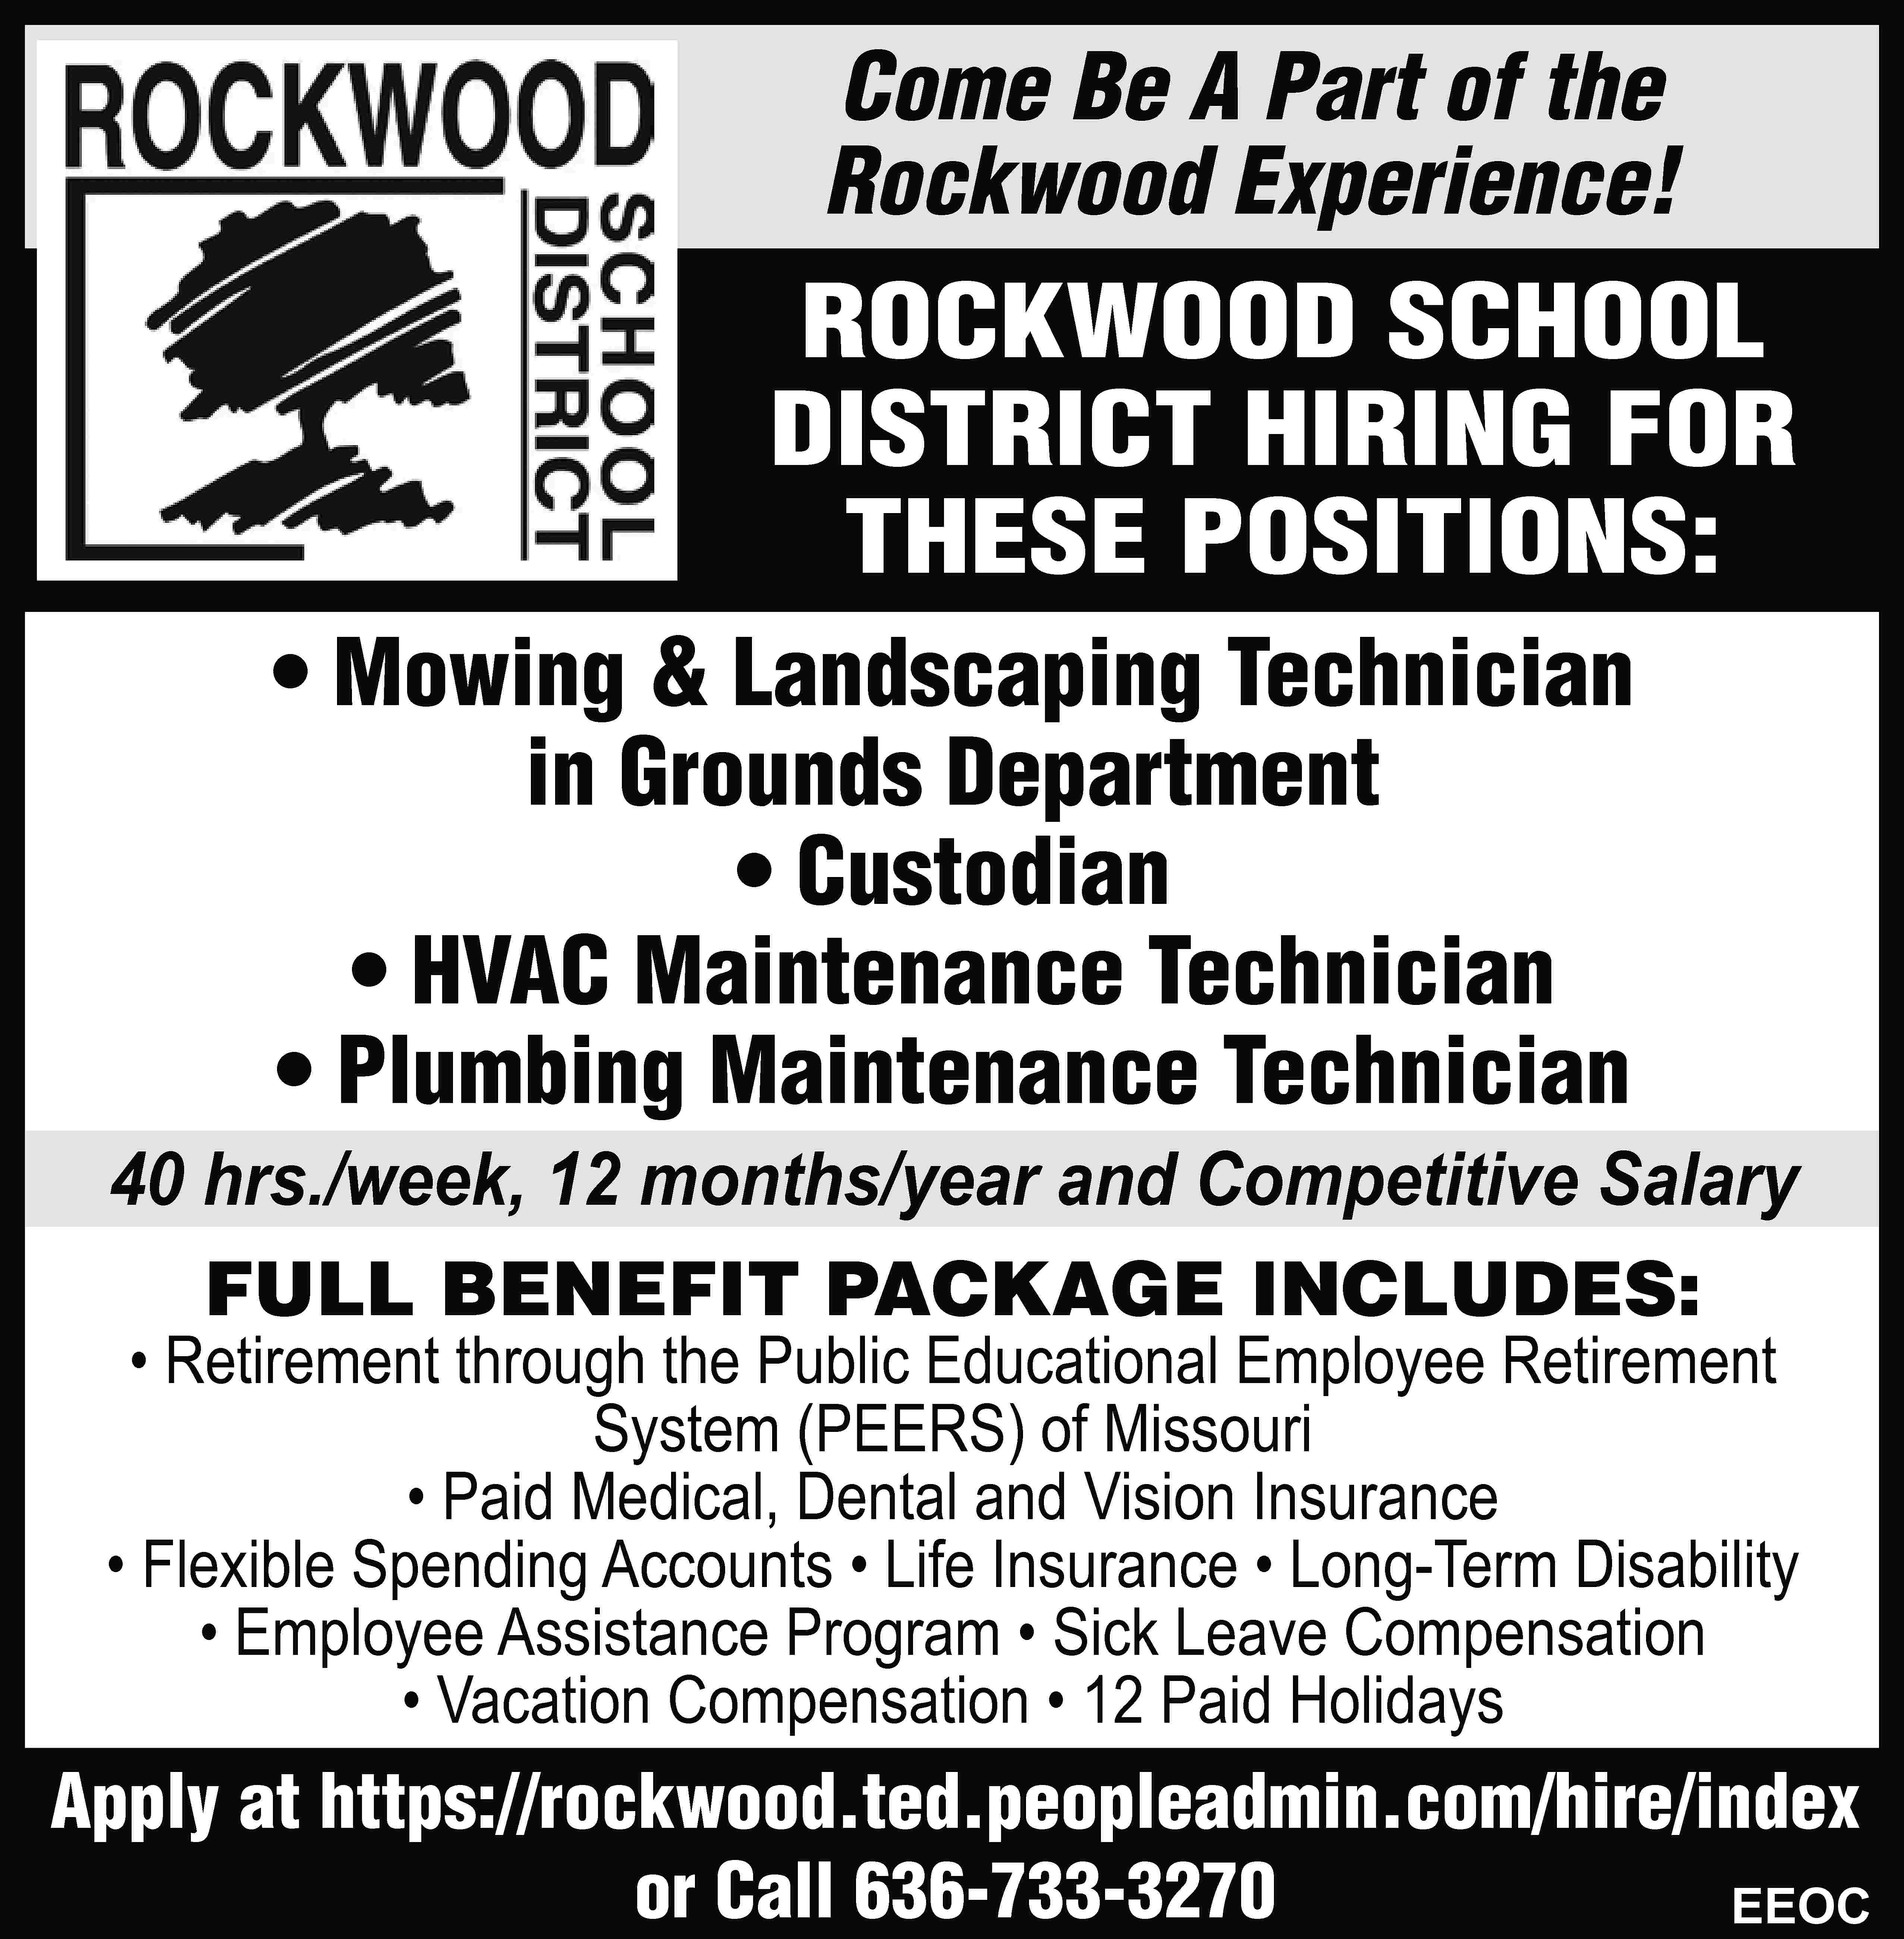 Come Be A Part of  Come Be A Part of the Rockwood Experience! ROCKWOOD SCHOOL DISTRICT HIRING FOR THESE POSITIONS: • Mowing & Landscaping Technician in Grounds Department • Custodian • HVAC Maintenance Technician • Plumbing Maintenance Technician 40 hrs./week, 12 months/year and Competitive Salary FULL BENEFIT PACKAGE INCLUDES: • Retirement through the Public Educational Employee Retirement System (PEERS) of Missouri • Paid Medical, Dental and Vision Insurance • Flexible Spending Accounts • Life Insurance • Long-Term Disability • Employee Assistance Program • Sick Leave Compensation • Vacation Compensation • 12 Paid Holidays Apply at https://rockwood.ted.peopleadmin.com/hire/index or Call 636-733-3270 EEOC